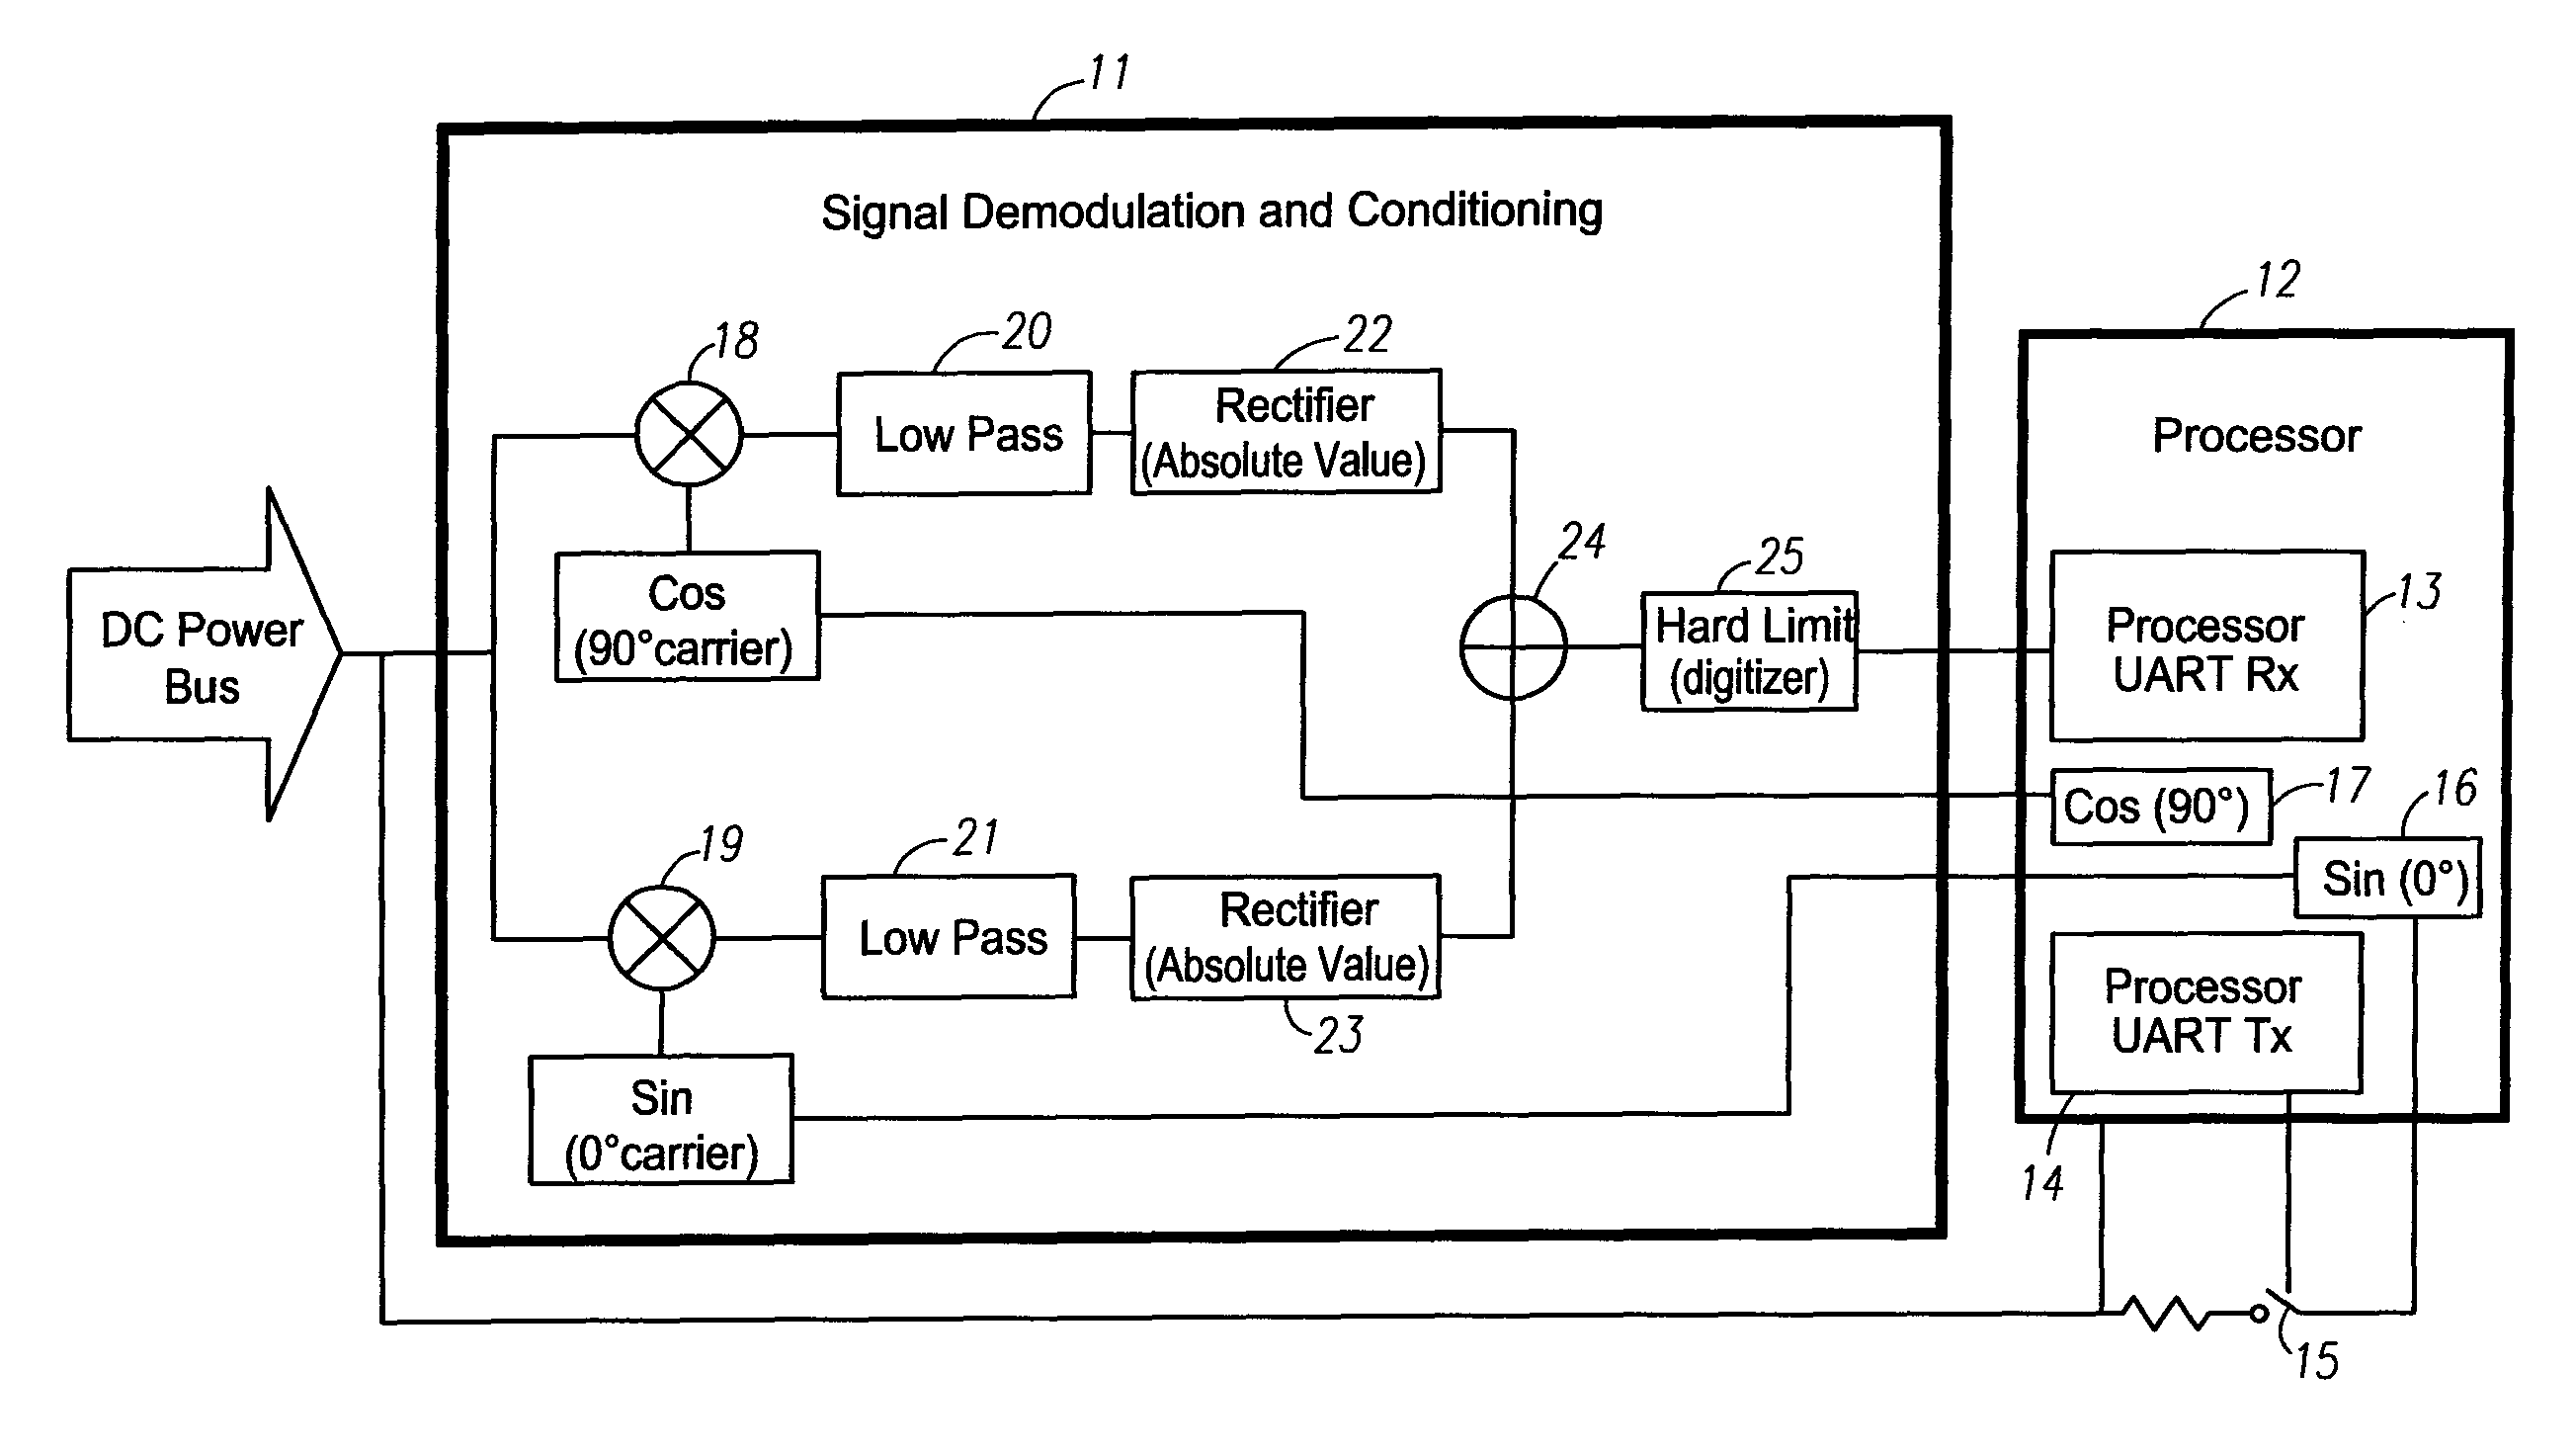 Circuit for communication over DC power line using high temperature electronics